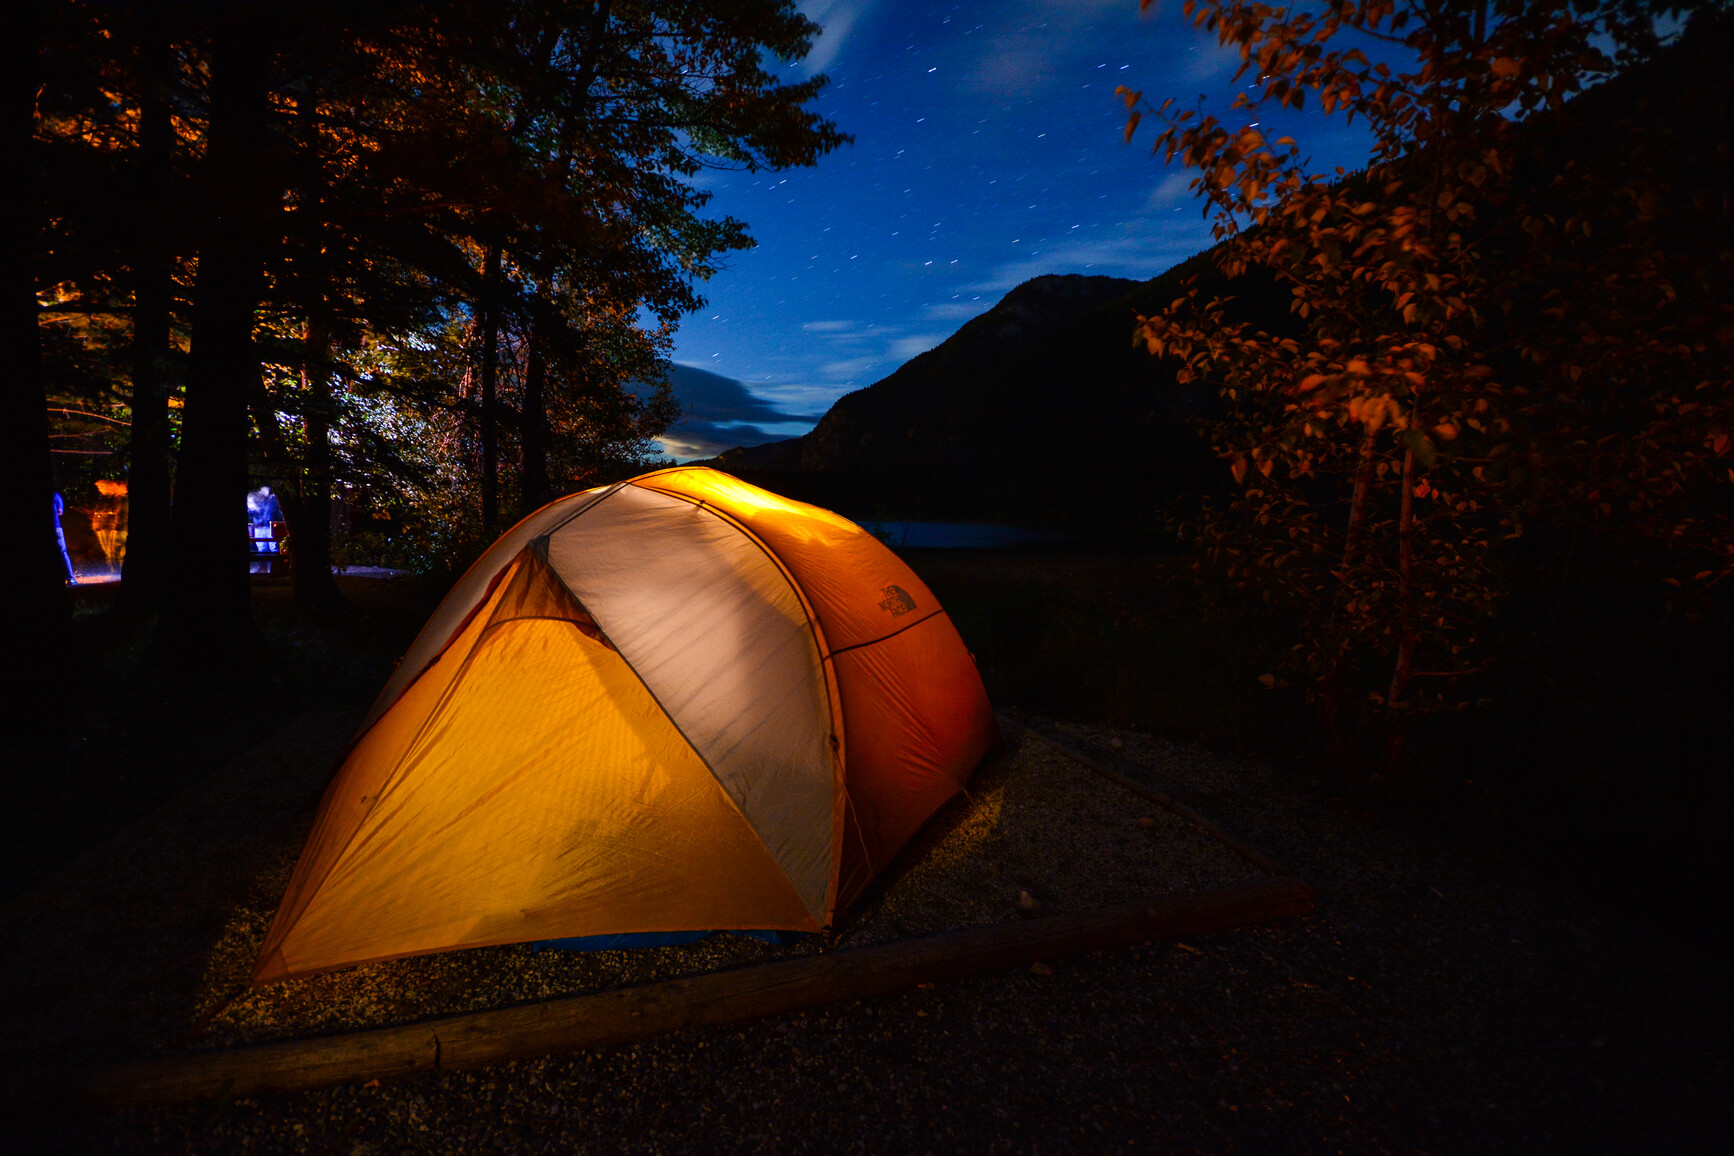 Campsite at night with a tent glowing from a light on inside. A fire is burning in the fire ring. In the background is a lake and forest covered mountains.